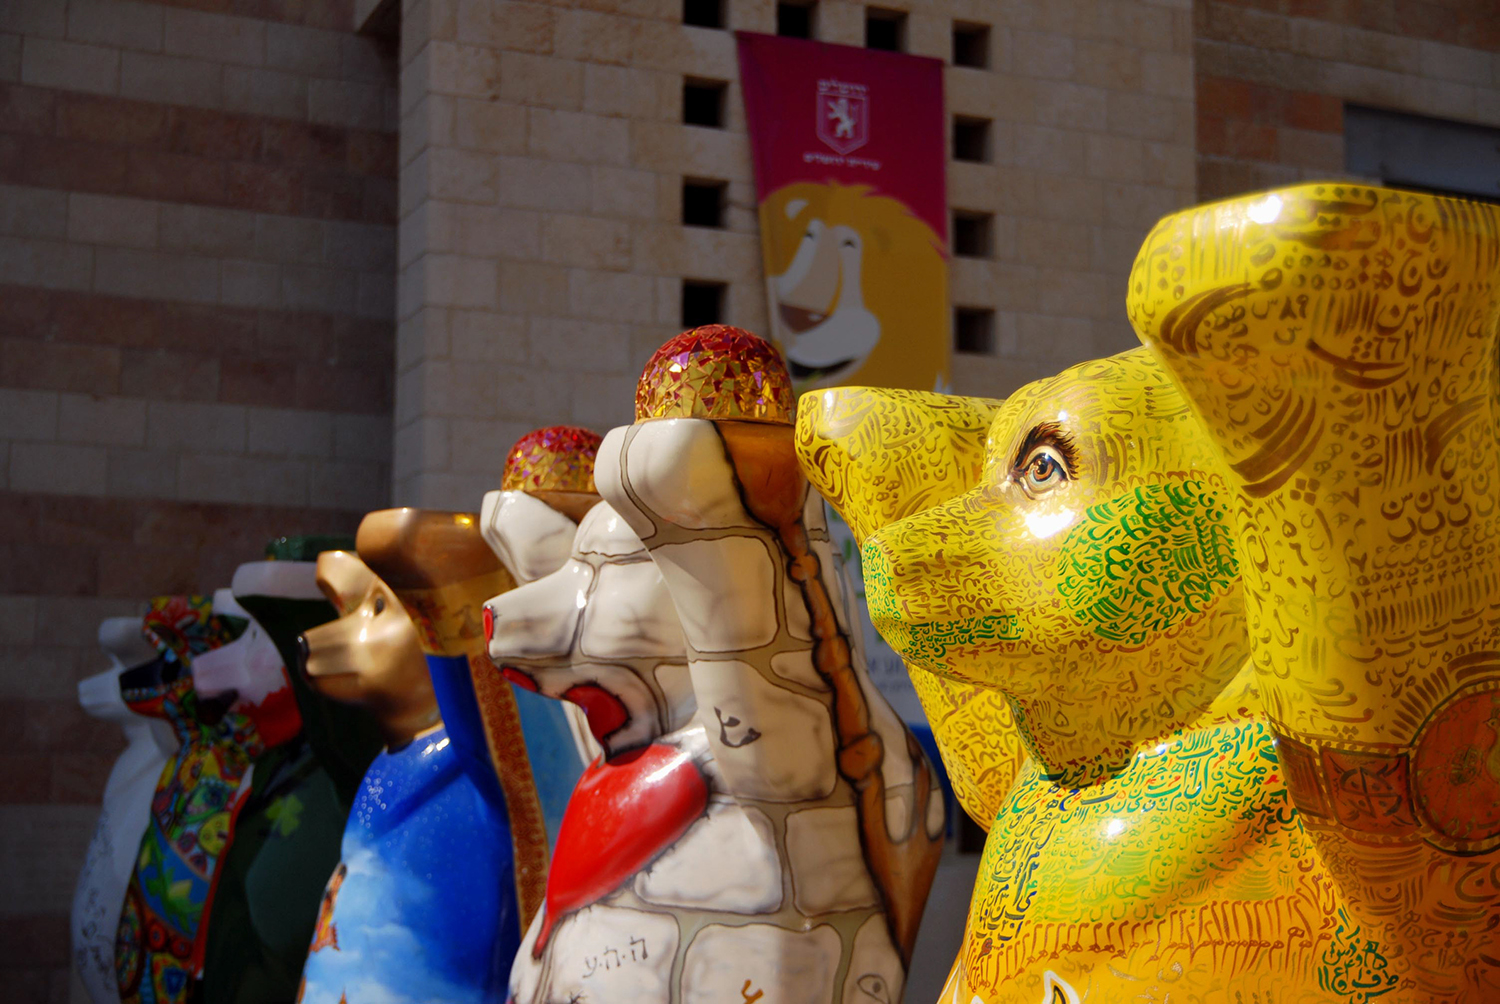 United Buddy Bears is an international art exhibition with more than 140 bears represented the UN countries, promoting tolerance and living in peace and harmony.